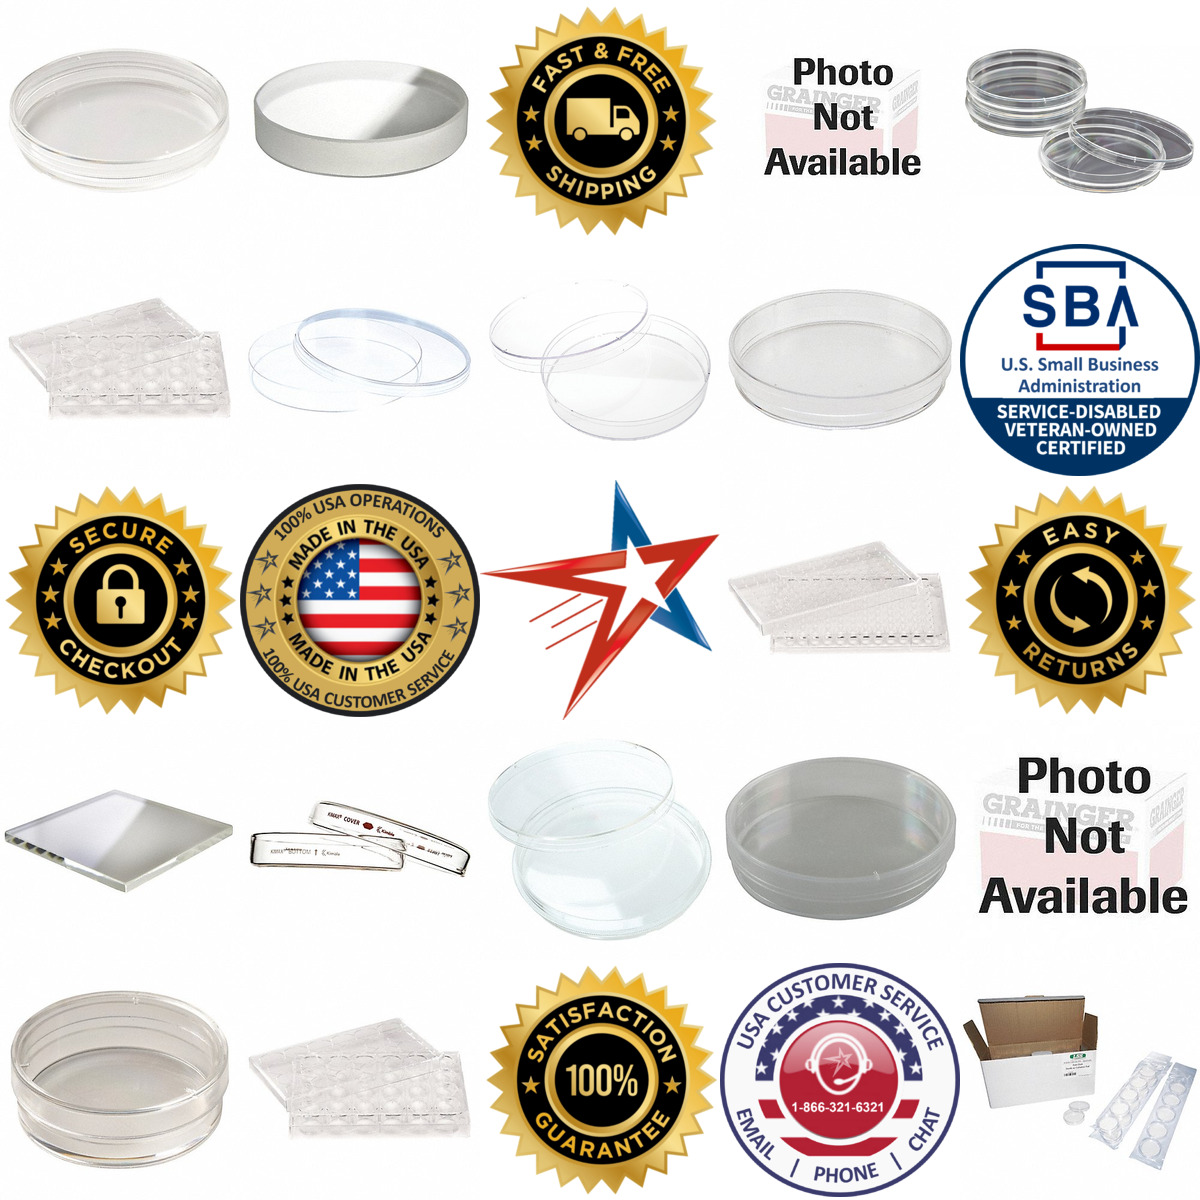 A selection of Dishes and Petri Dishes products on GoVets